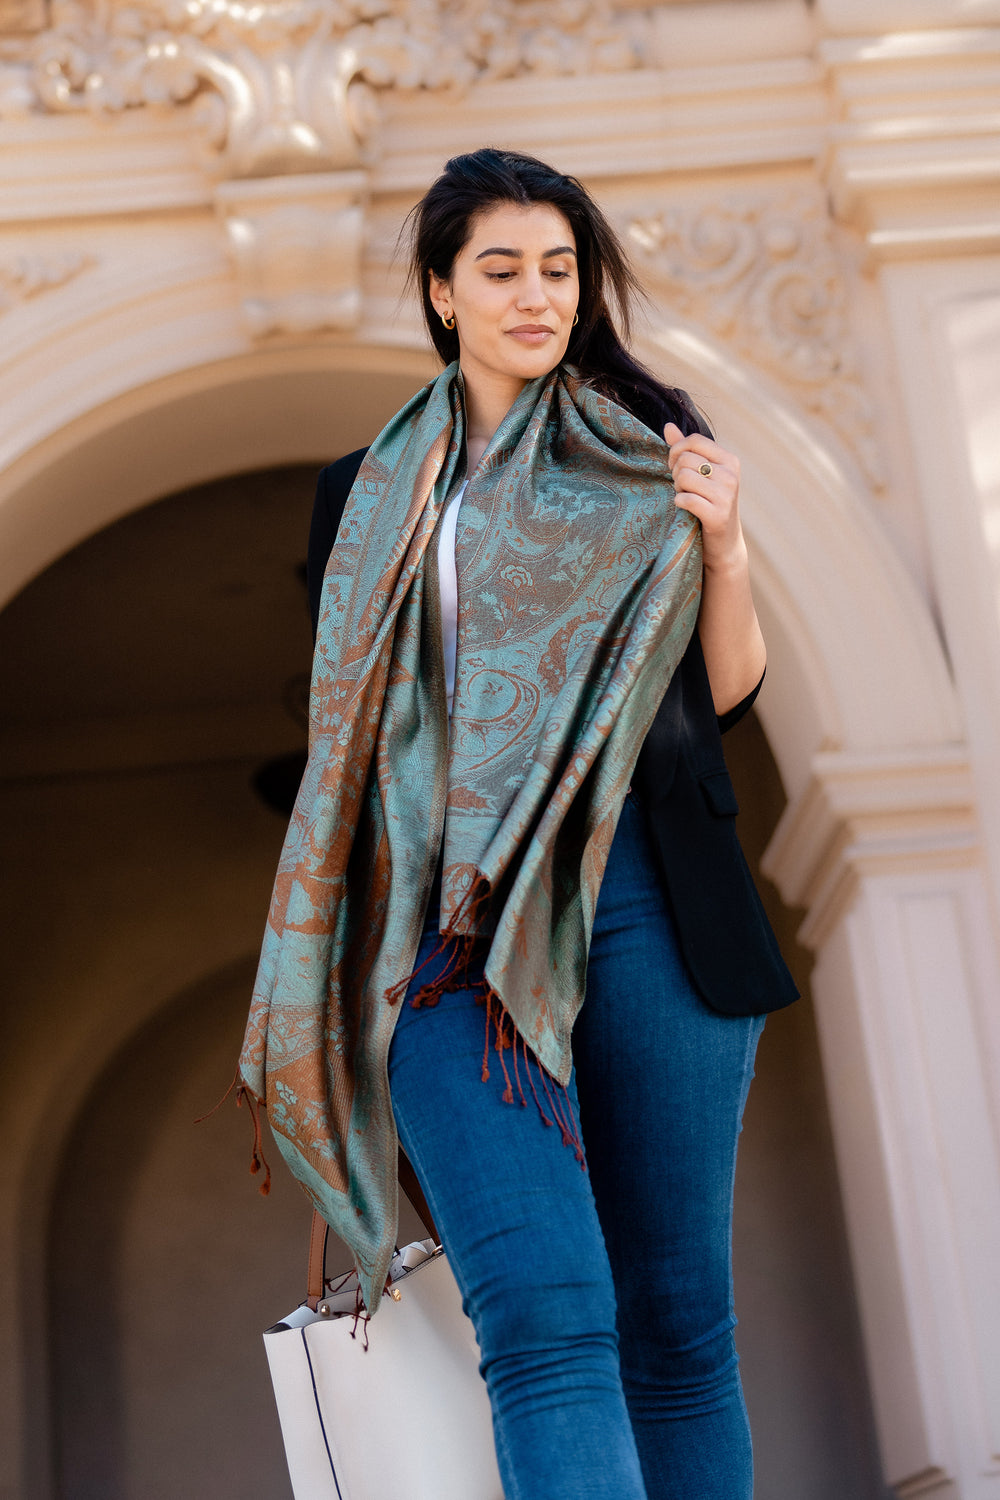 Embrace Pure Wool Shawl - Best wrap in USA for meditation for embrace journey within